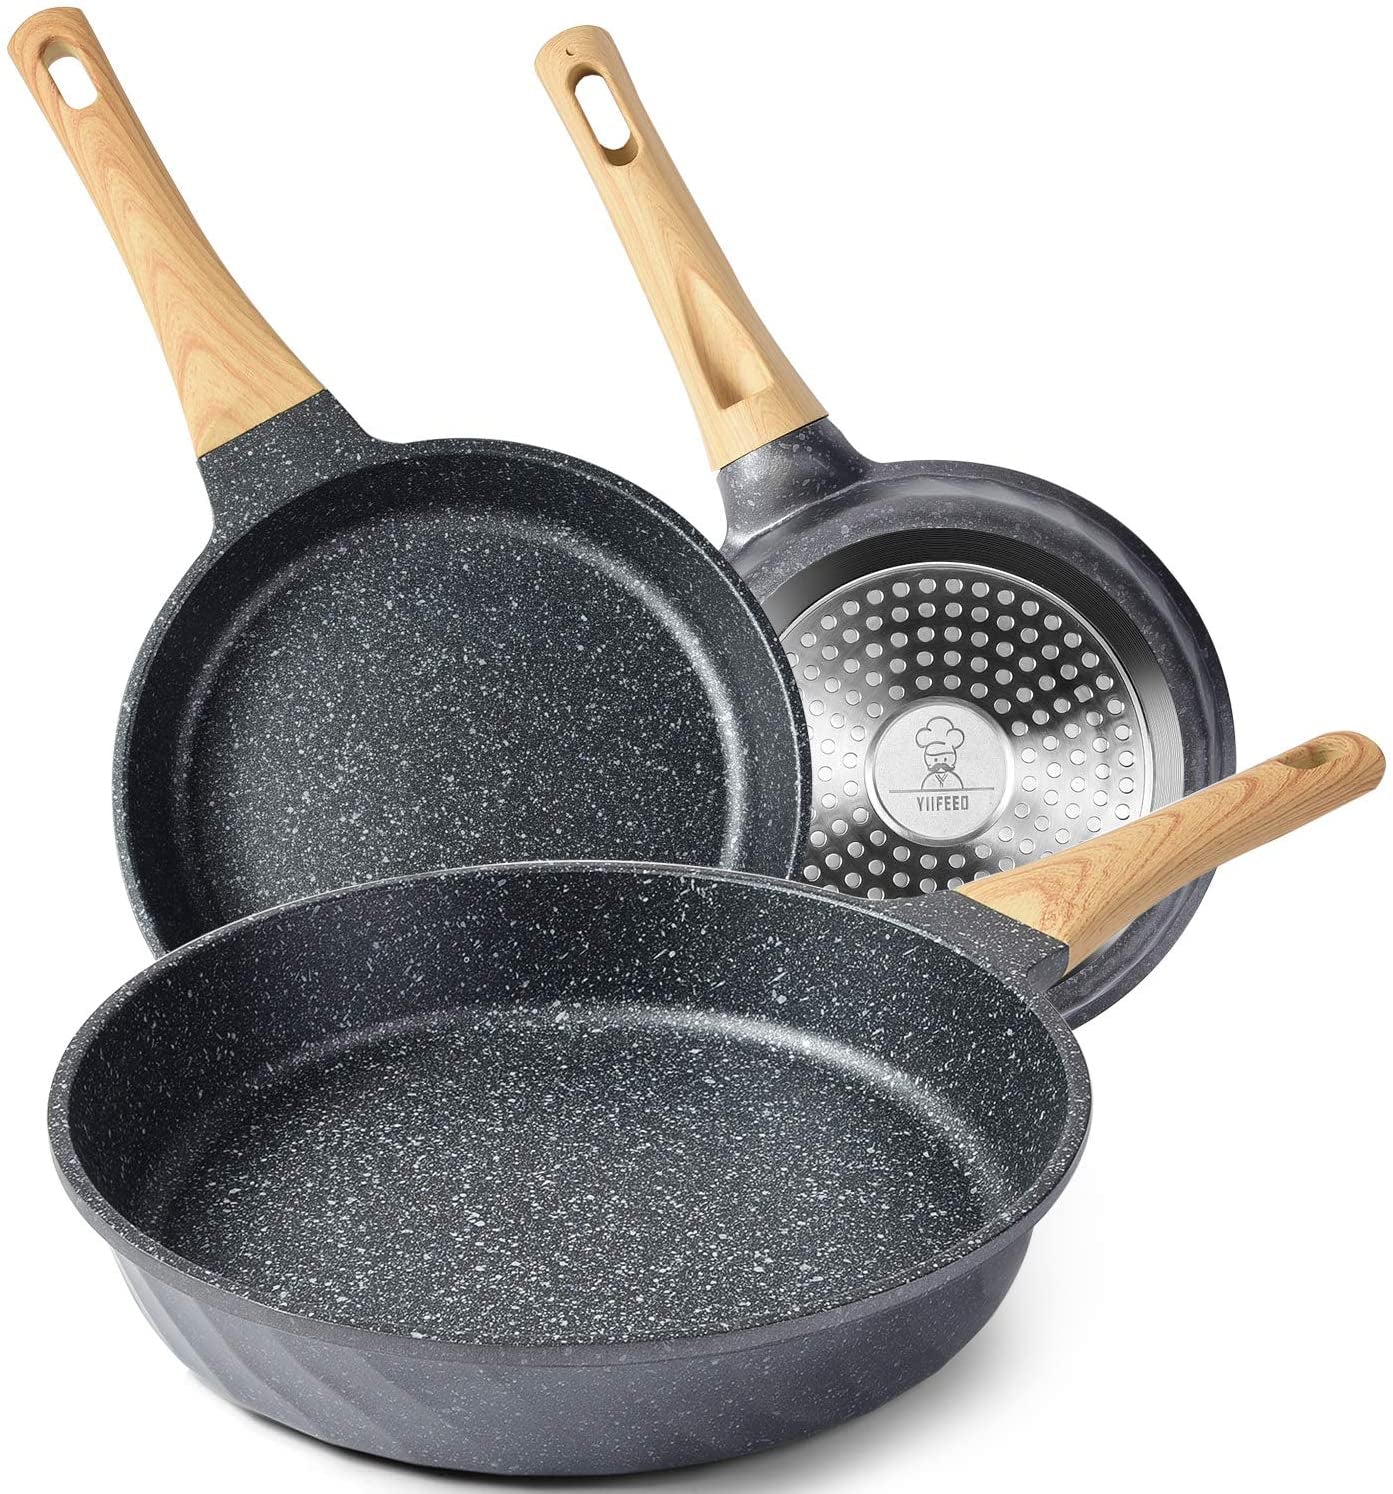 Frying Pans Nonstick, Induction Frying Pan Set Granite Skillet Pans for Cooking Omelette Pan Cookware Set with Heat-Resistant Handle, Christmas Gift for Women (8" &9.5" &11")